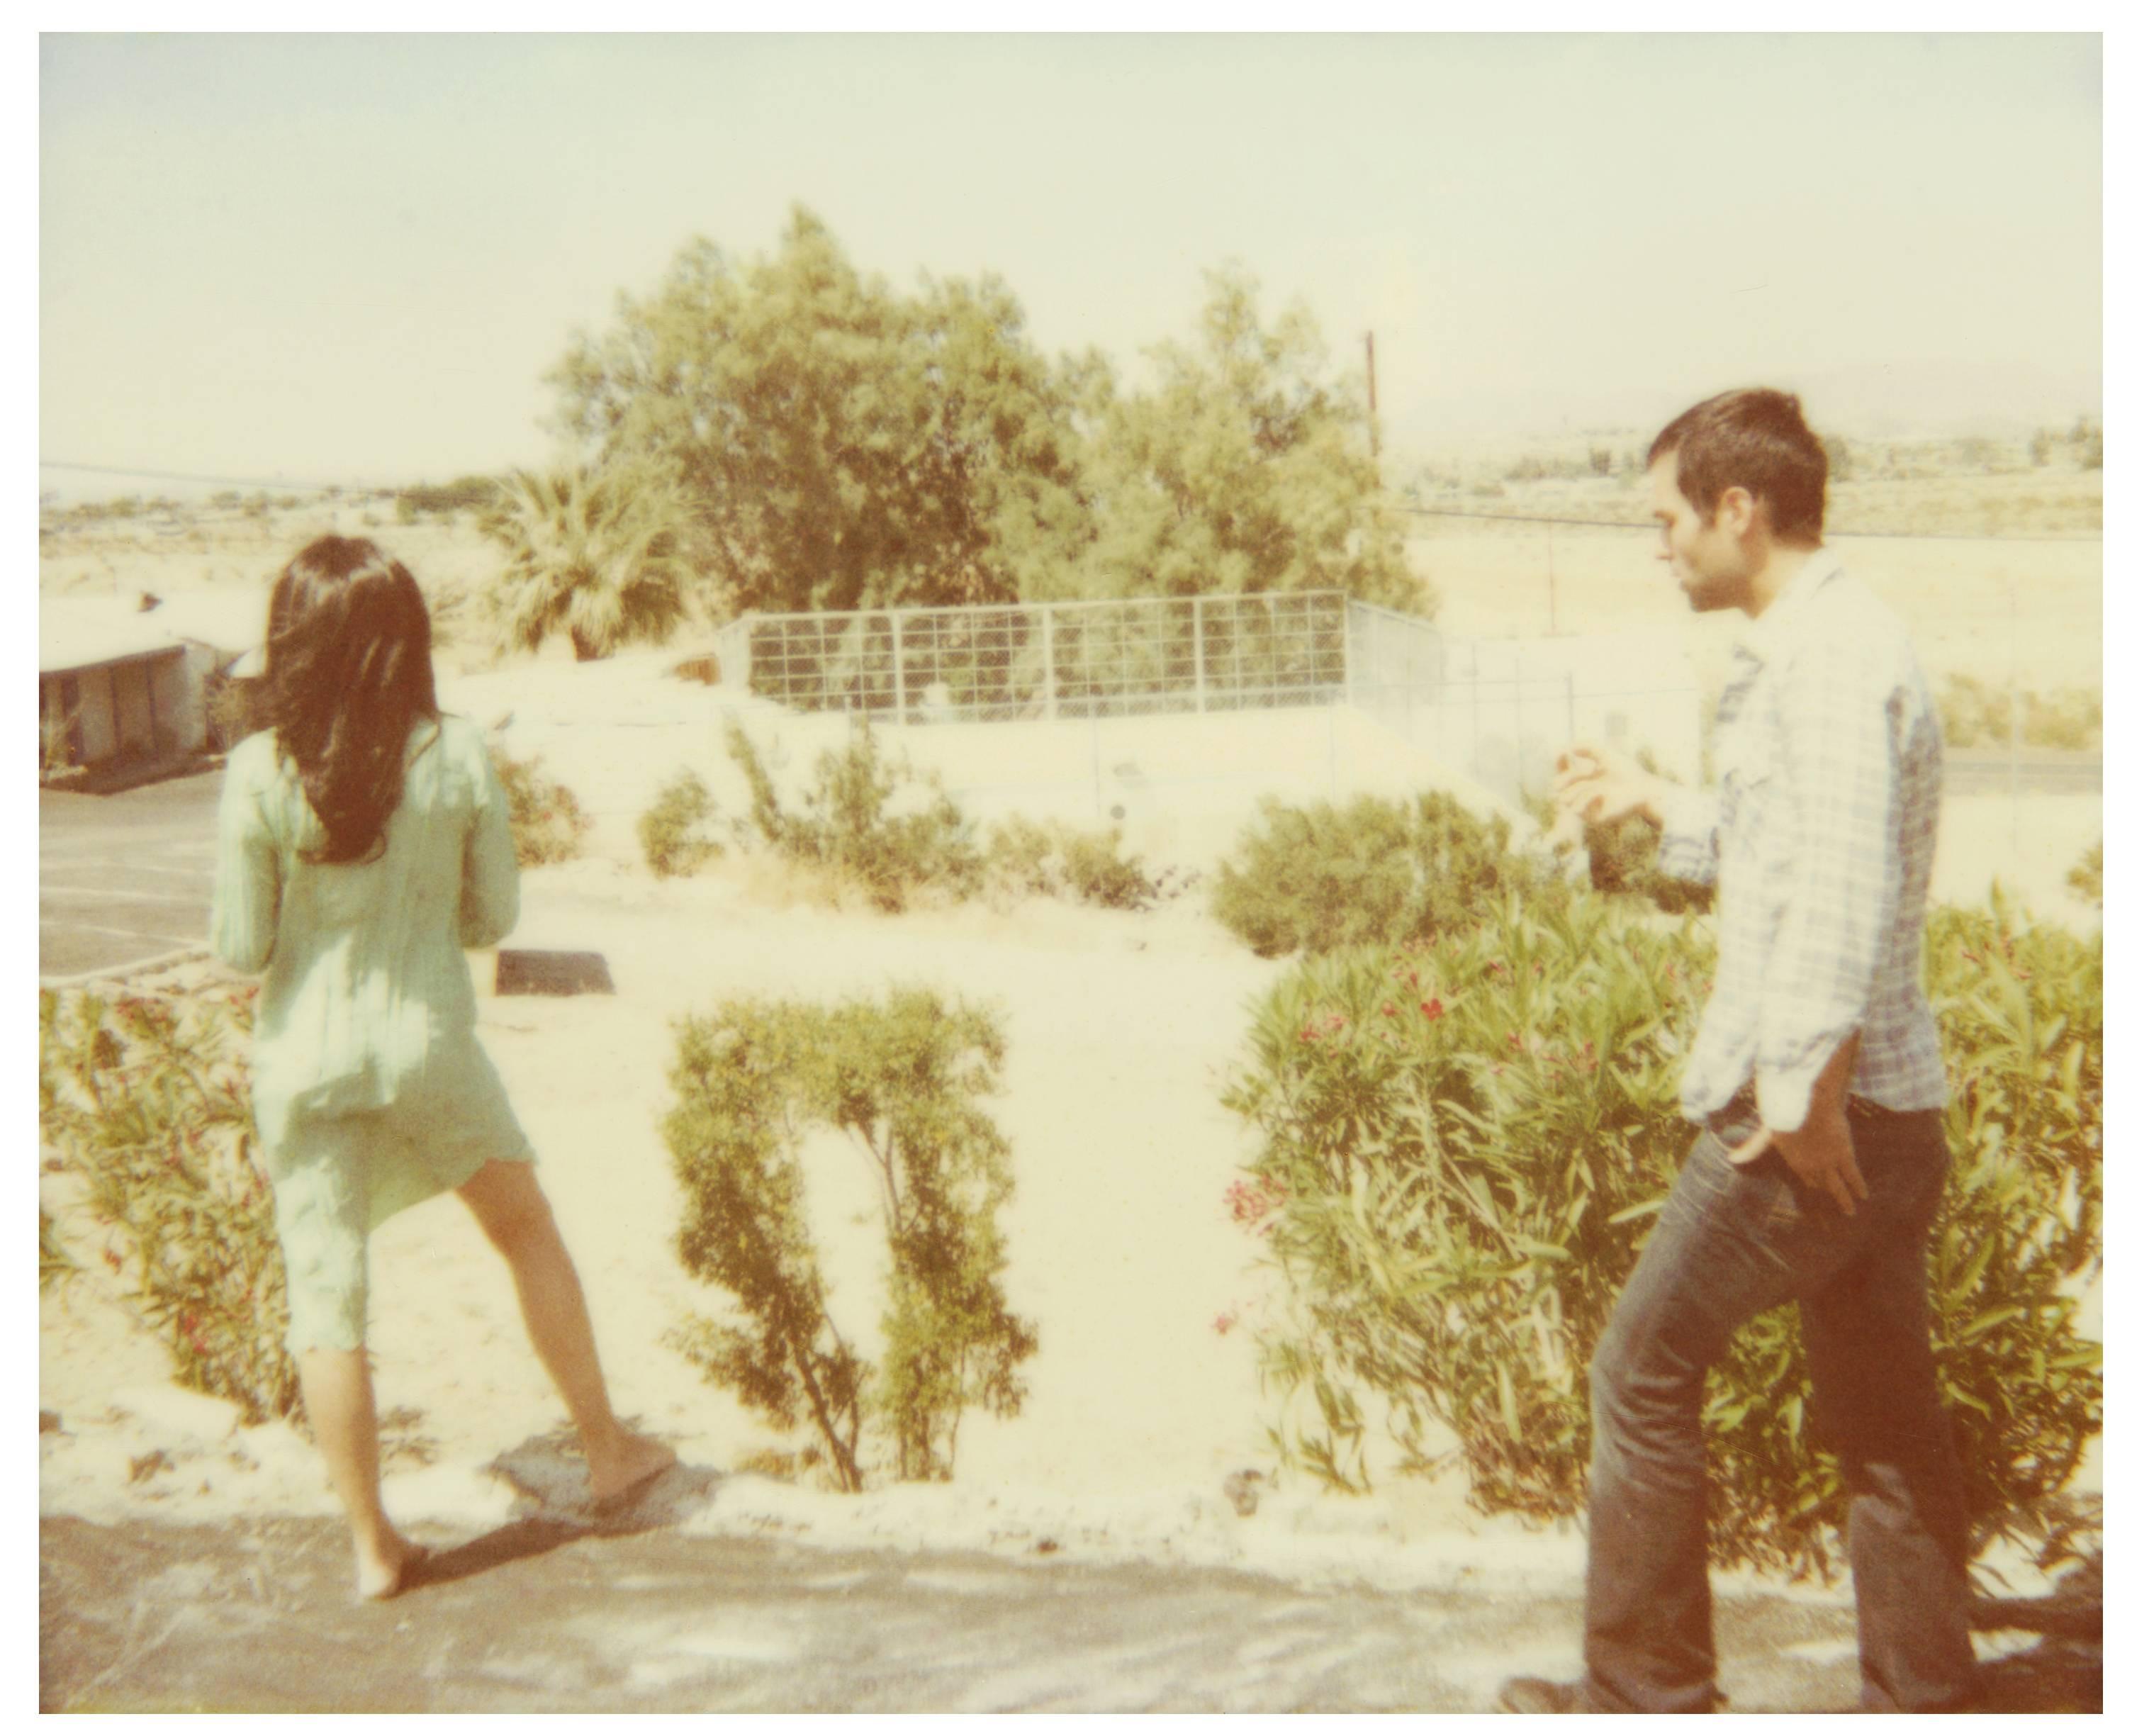 Stefanie Schneider Color Photograph - The Argument - The Princess and her Lover (29 Palms, CA) - End of Summer Sale